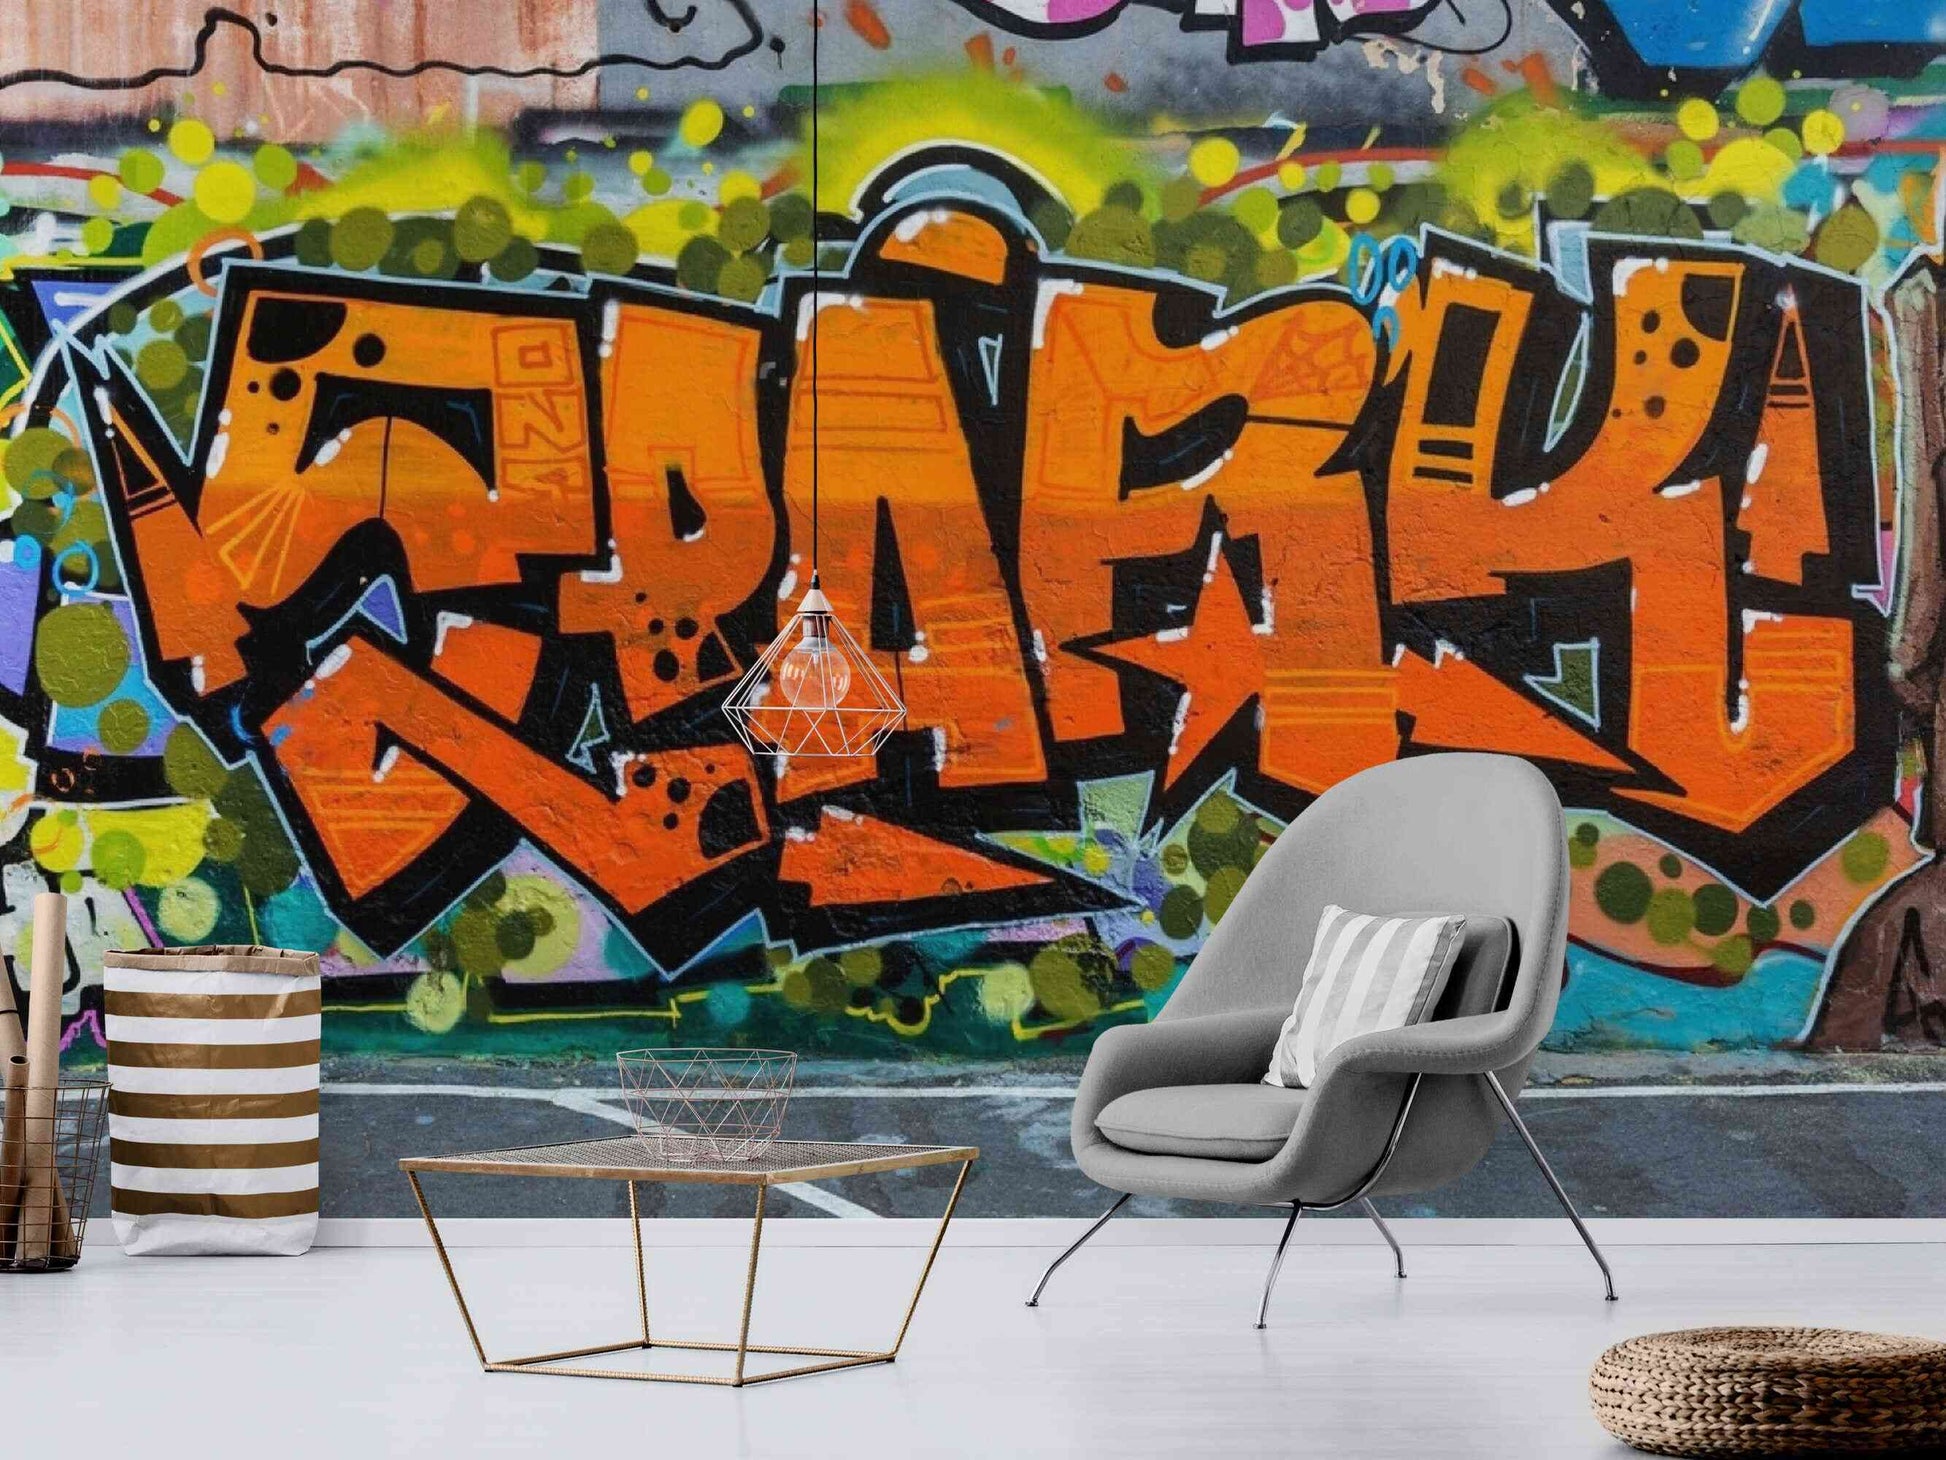 An image of a wallpaper with a street art graffiti design in various colors, including shades of orange, grey, black and yellow. The design features bold shapes, lines, and lettering, resembling traditional graffiti art. The wallpaper depicts a photograph of a graffiti wall, making it appear as if the design is painted directly onto the wall.